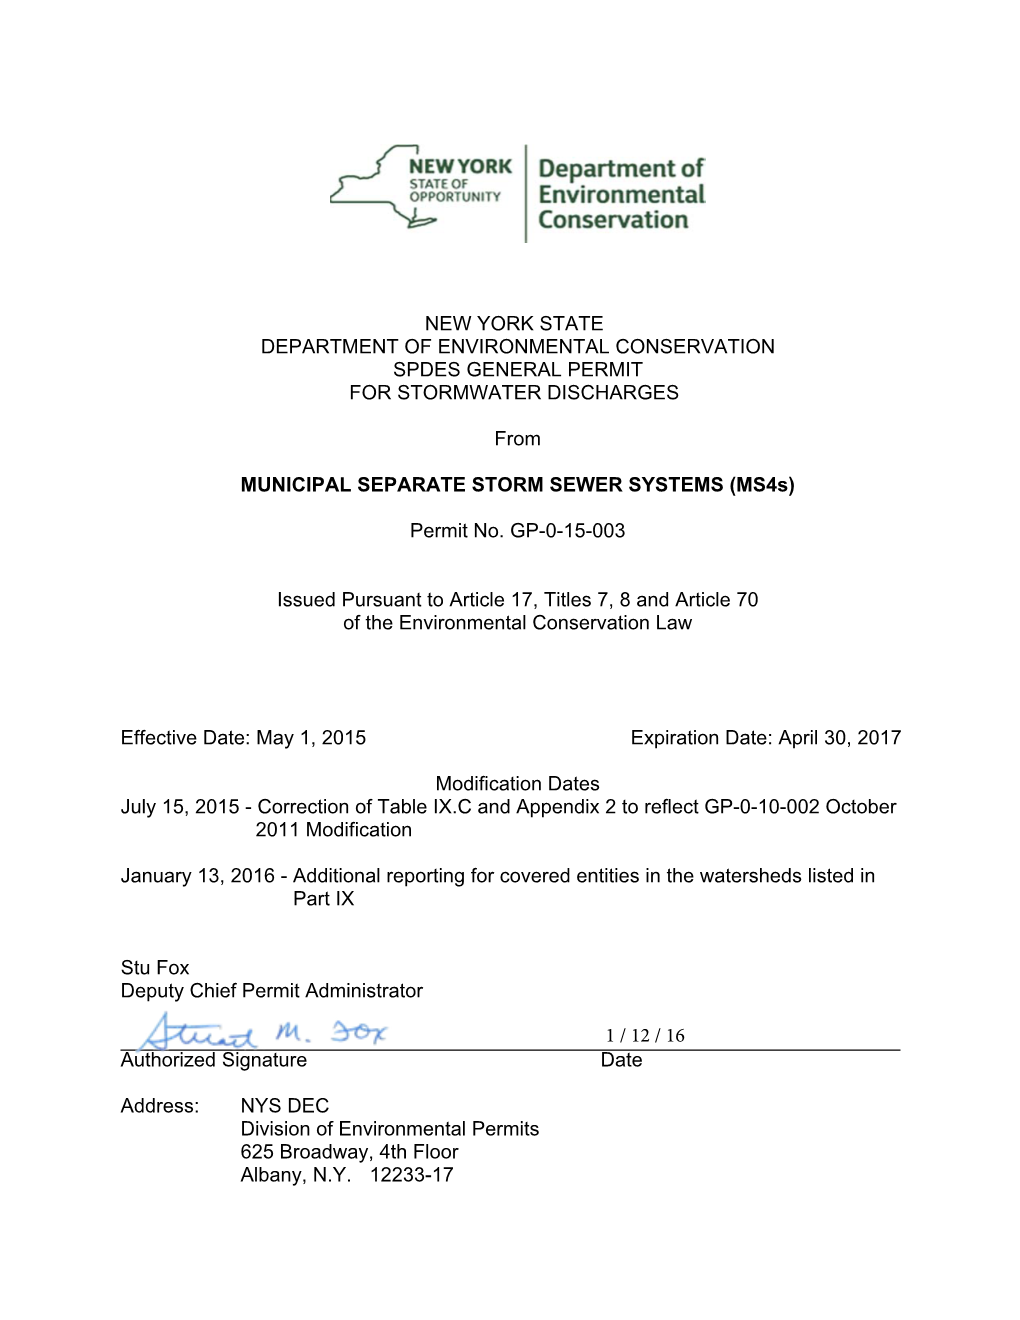 Municipal Separate Storm Sewer Systems Permit, GP-0-15-003